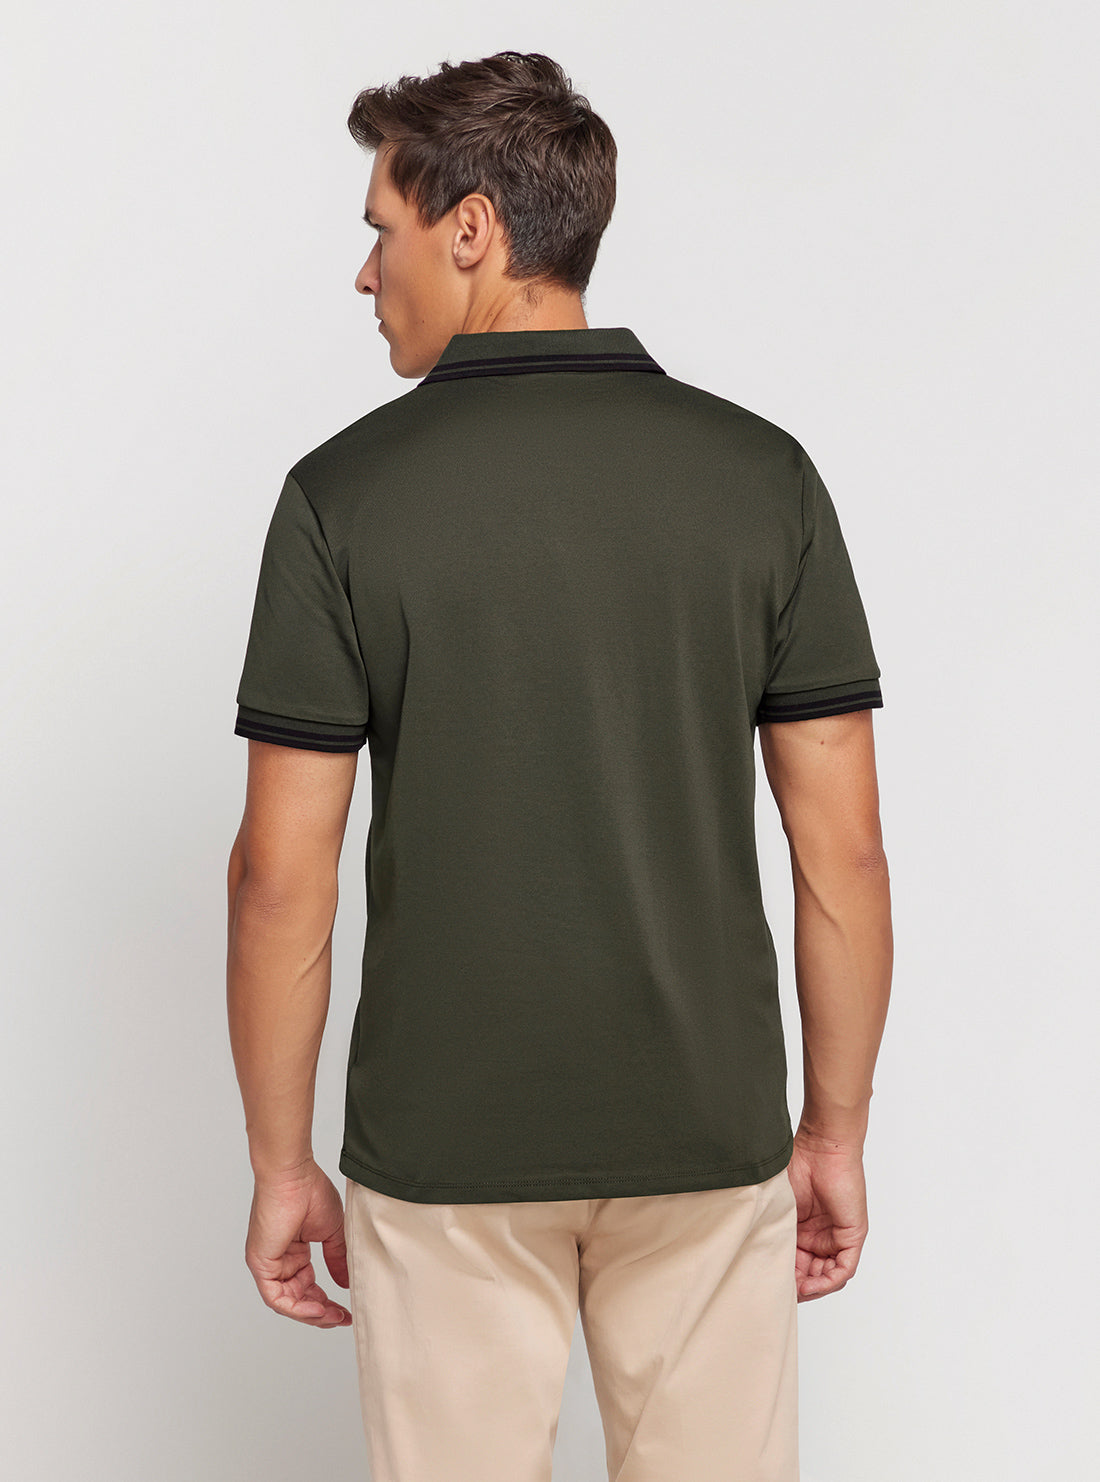 GUESS Brown Short Sleeve Pique Polo Shirt back view